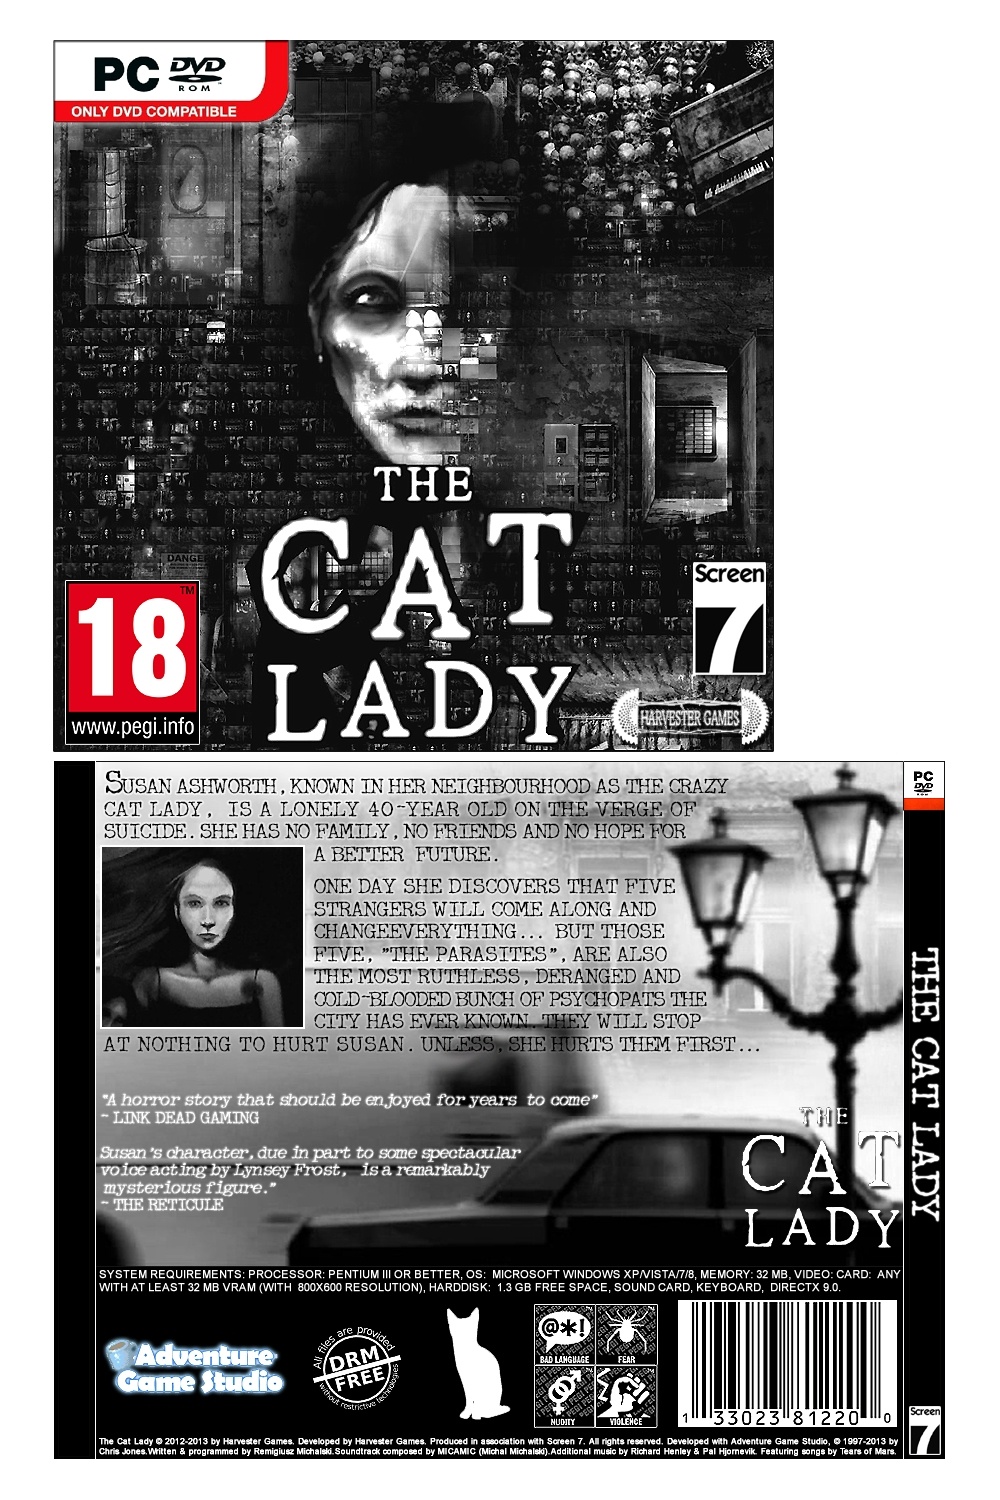 The Cat Lady box cover